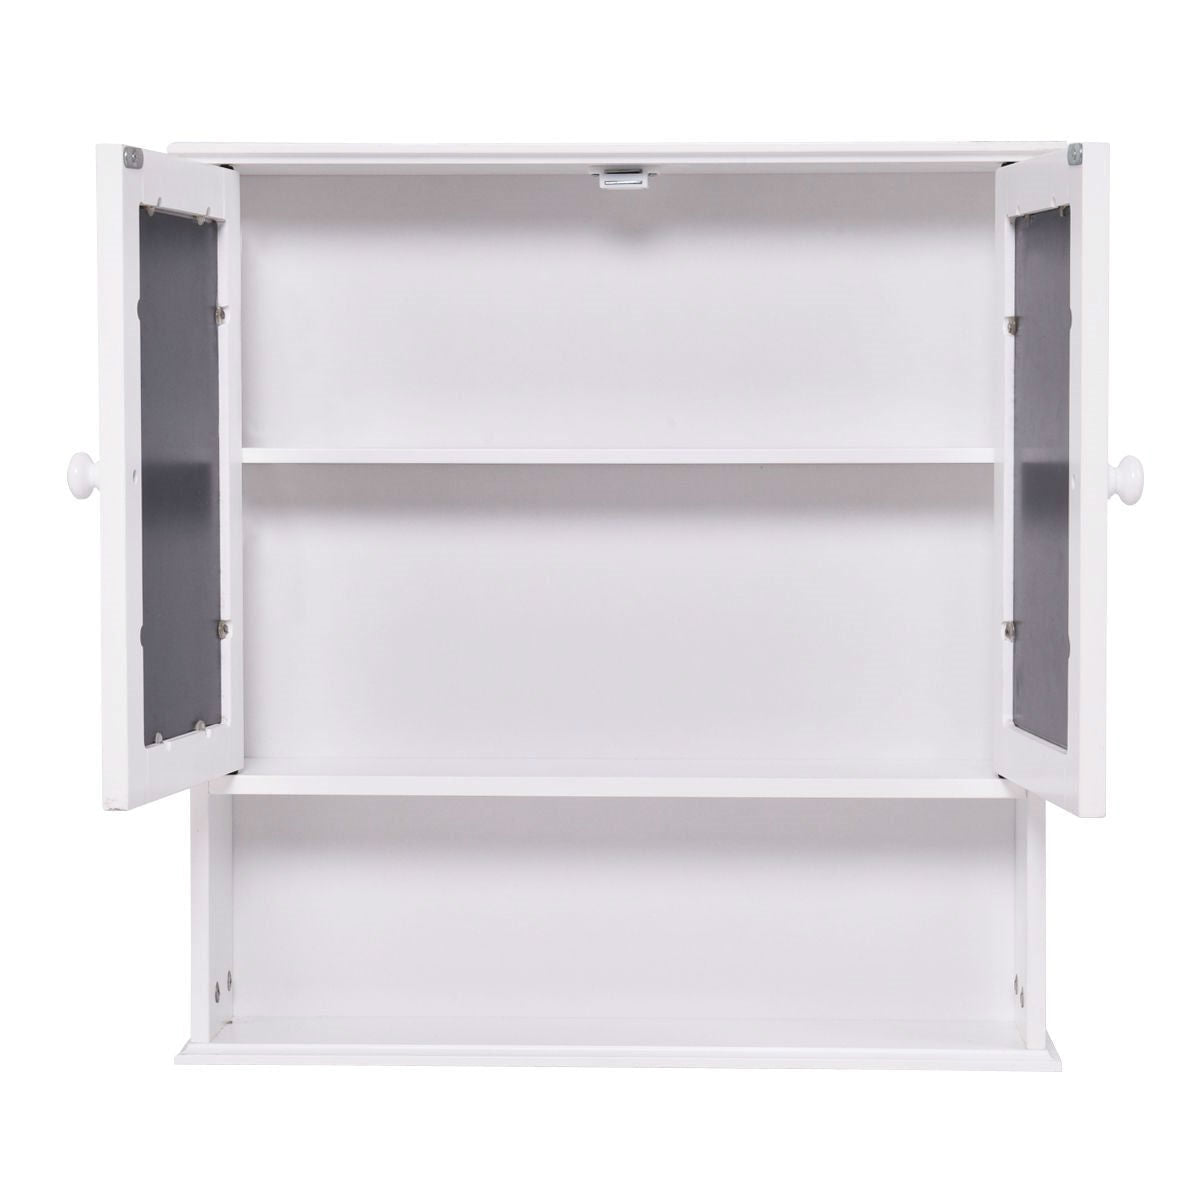 Bathroom > Bathroom Mirrors - Simple Bathroom Mirror Wall Cabinet In White Wood Finish 23 X 22 Inch